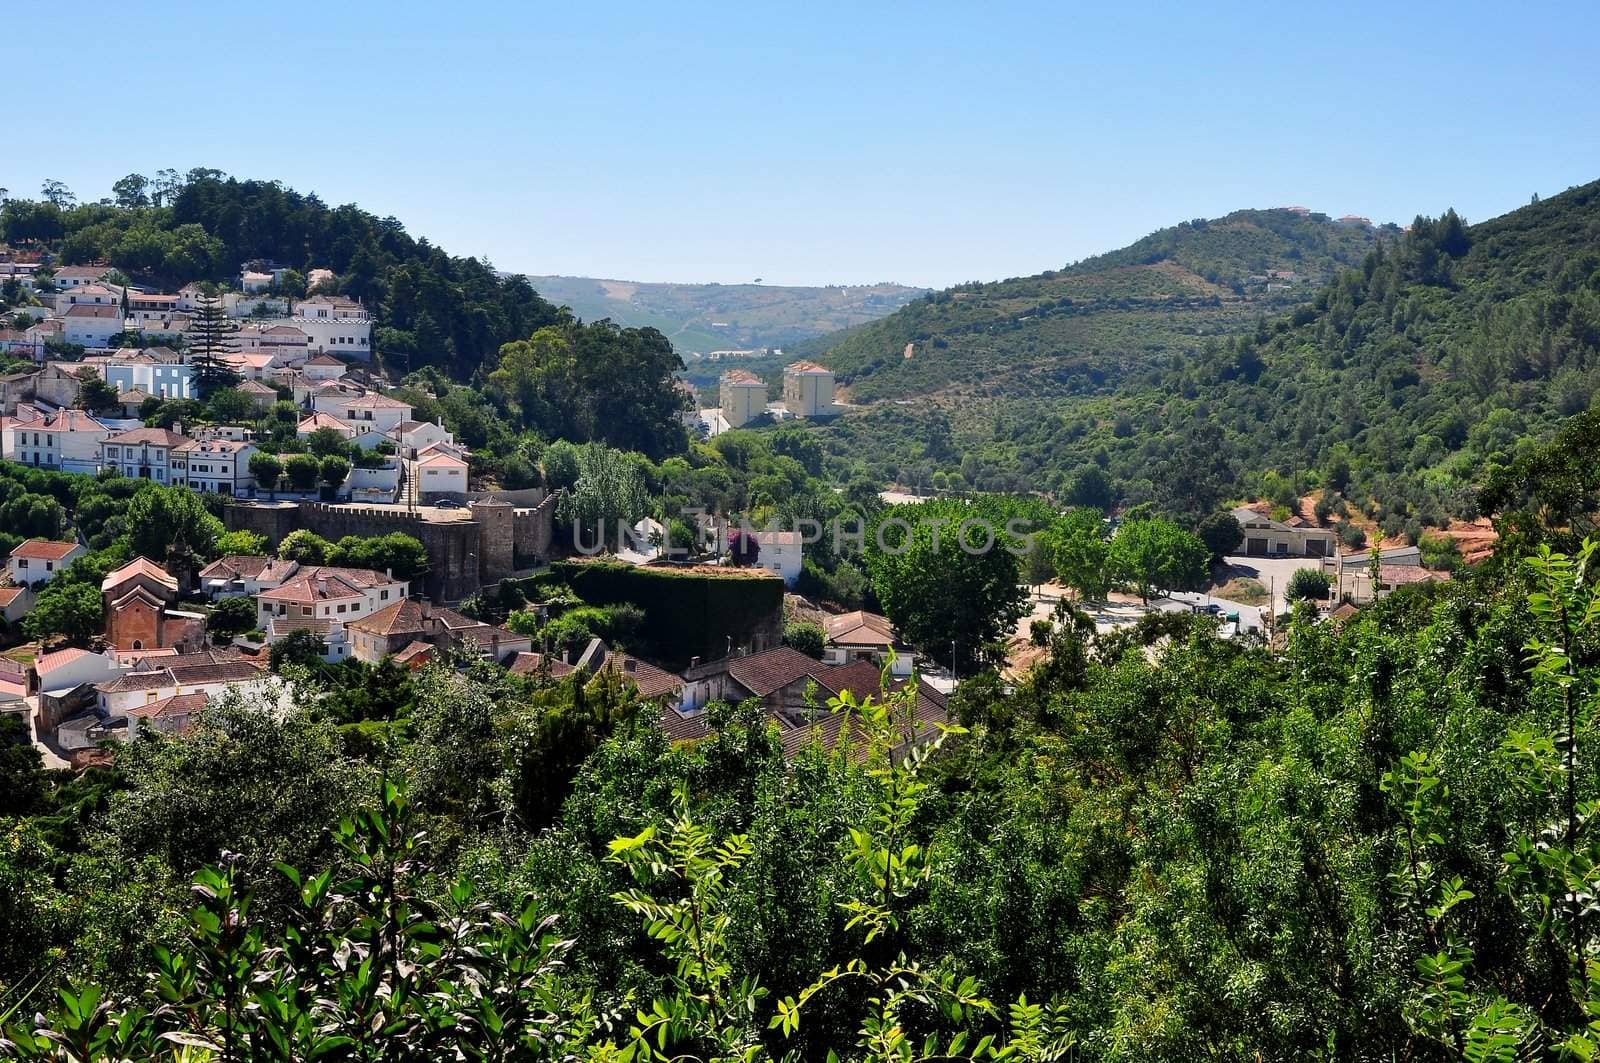 Old town,village on the hillside in Portugal by vas25